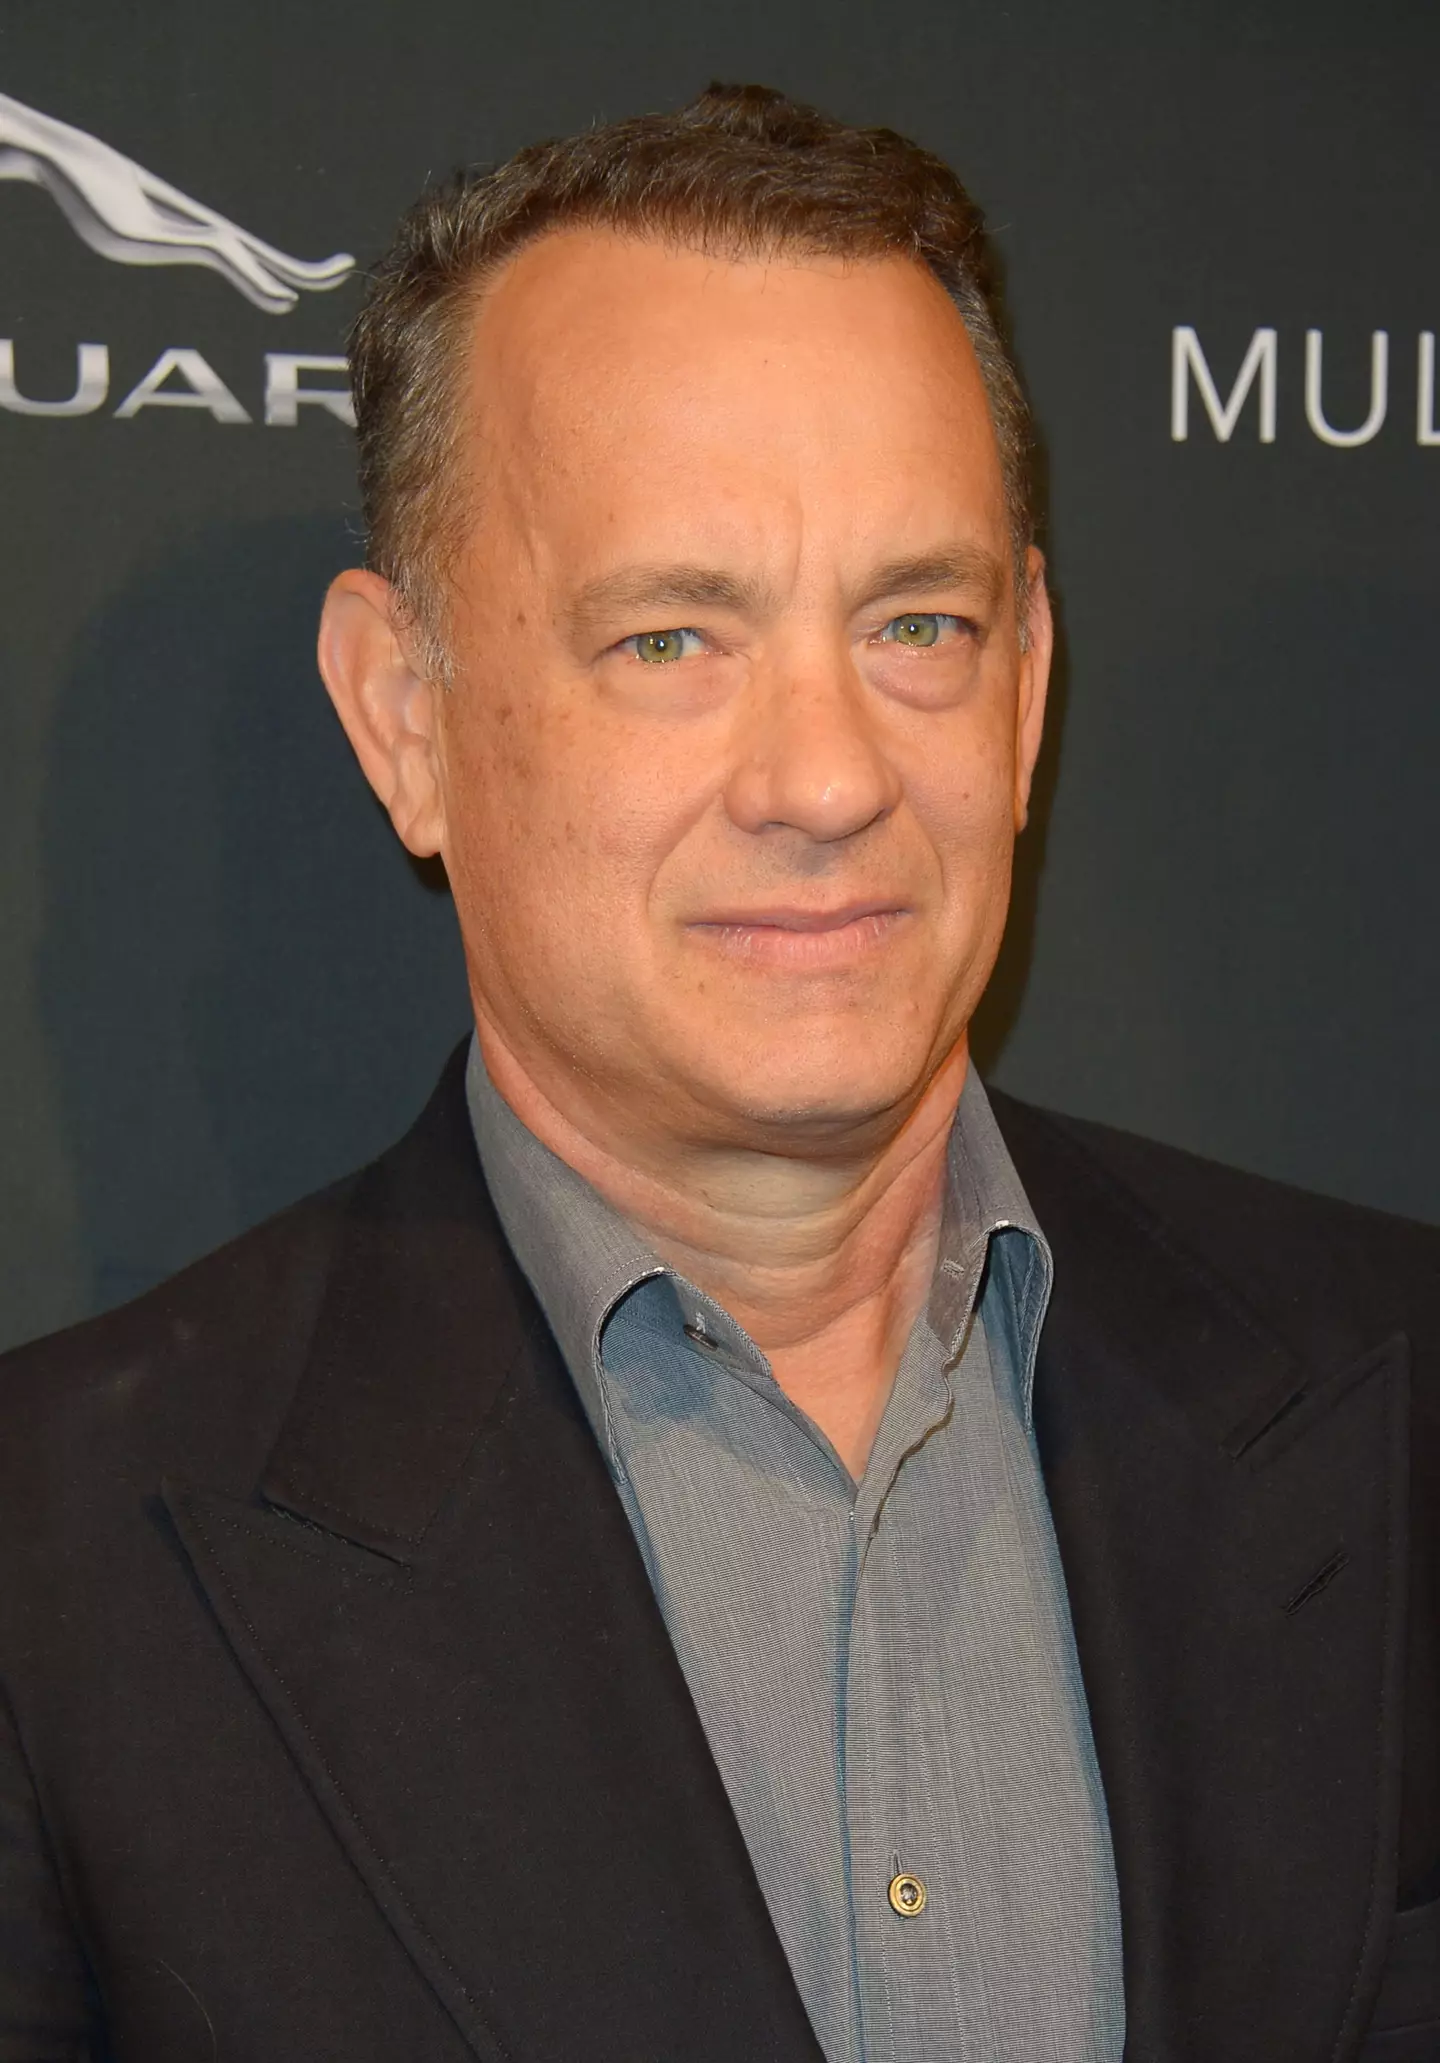 Hanks apparently wasn't bothered by Reeves' outburst.